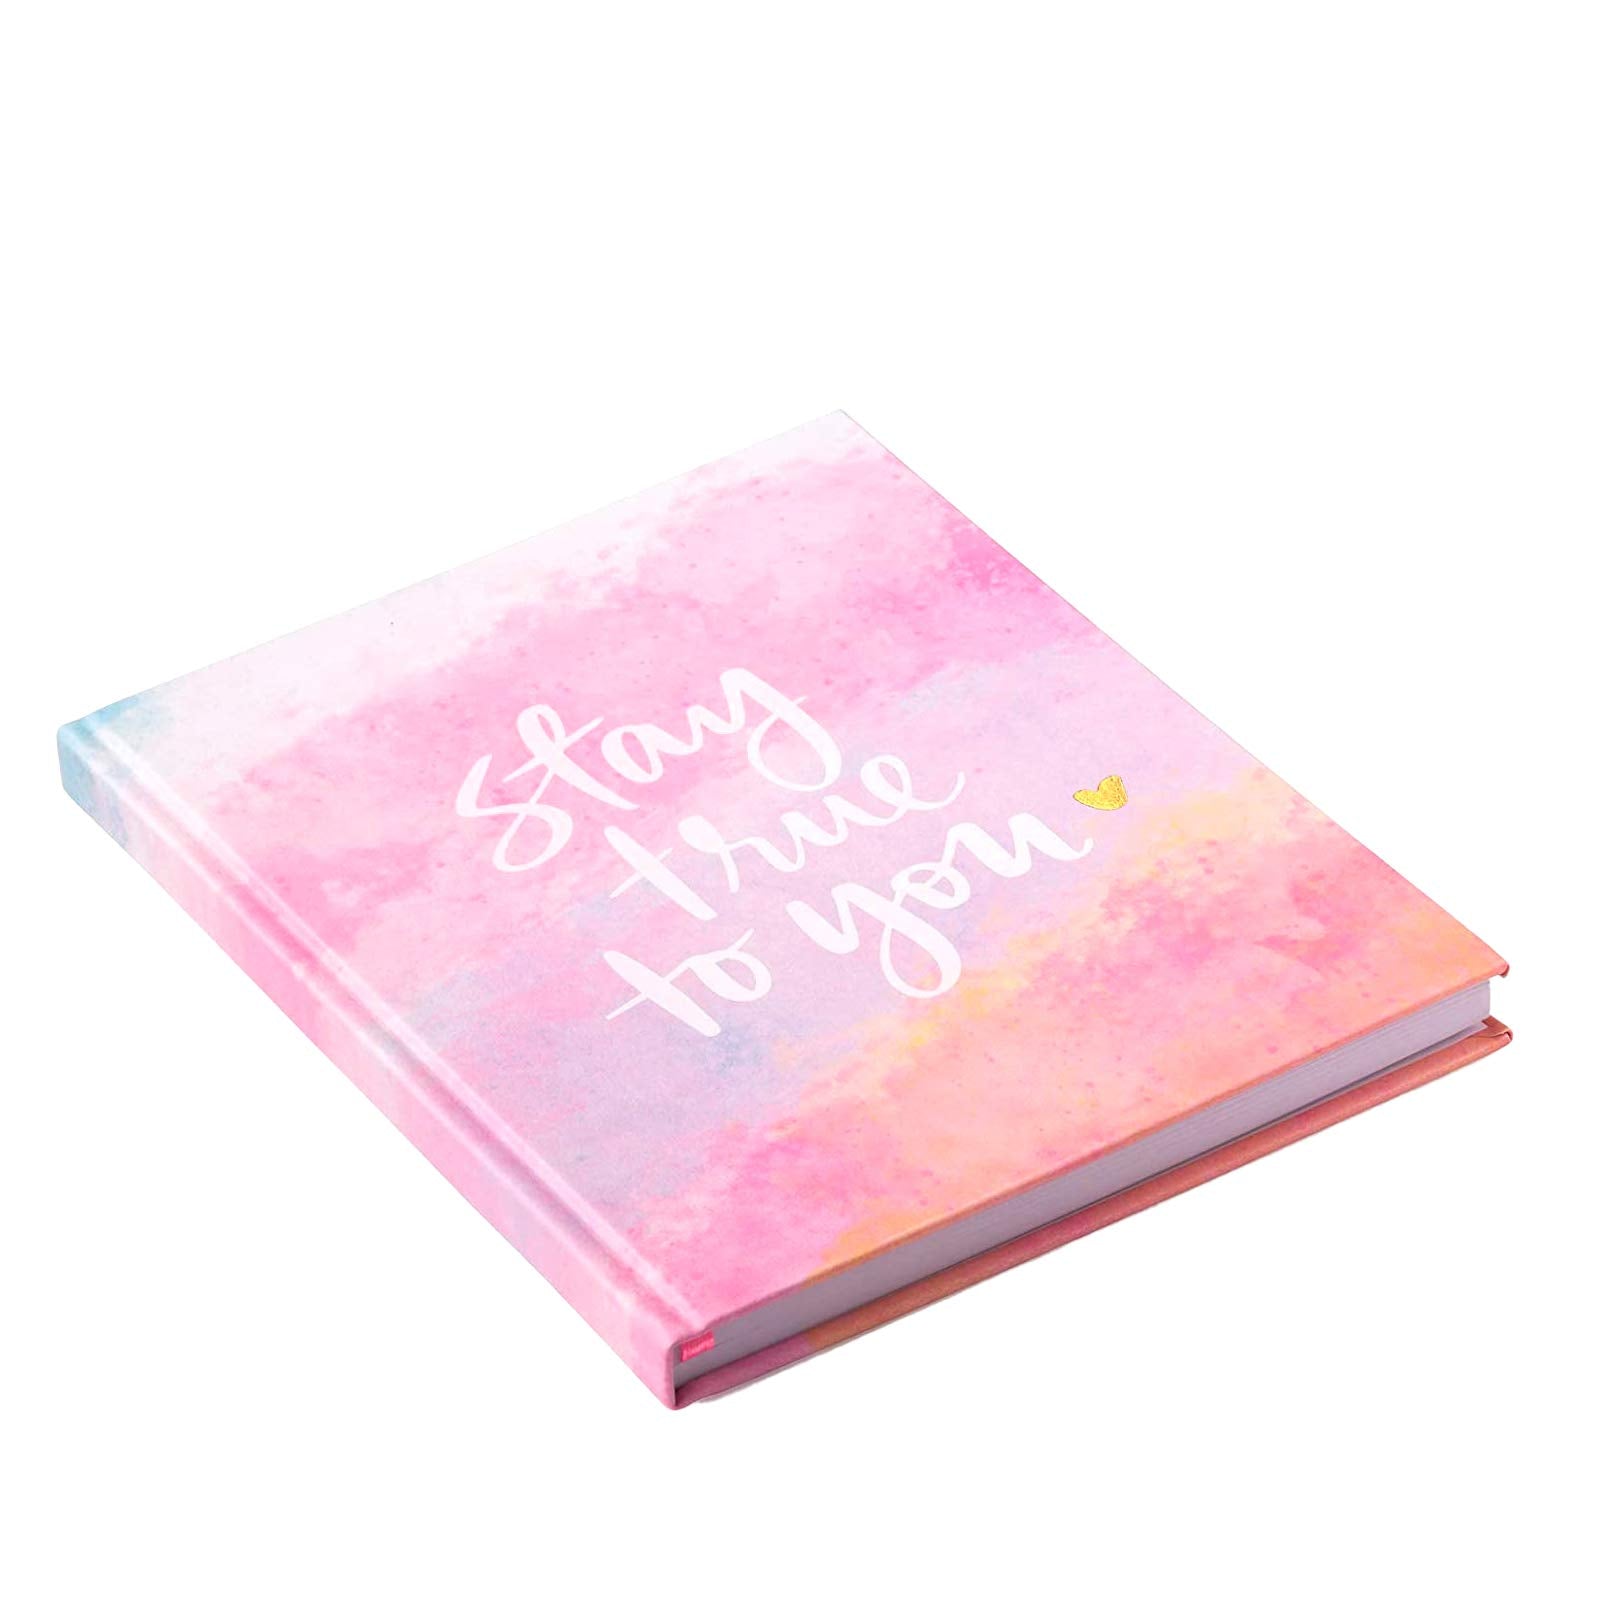 Stay True To You 8x10 Journal